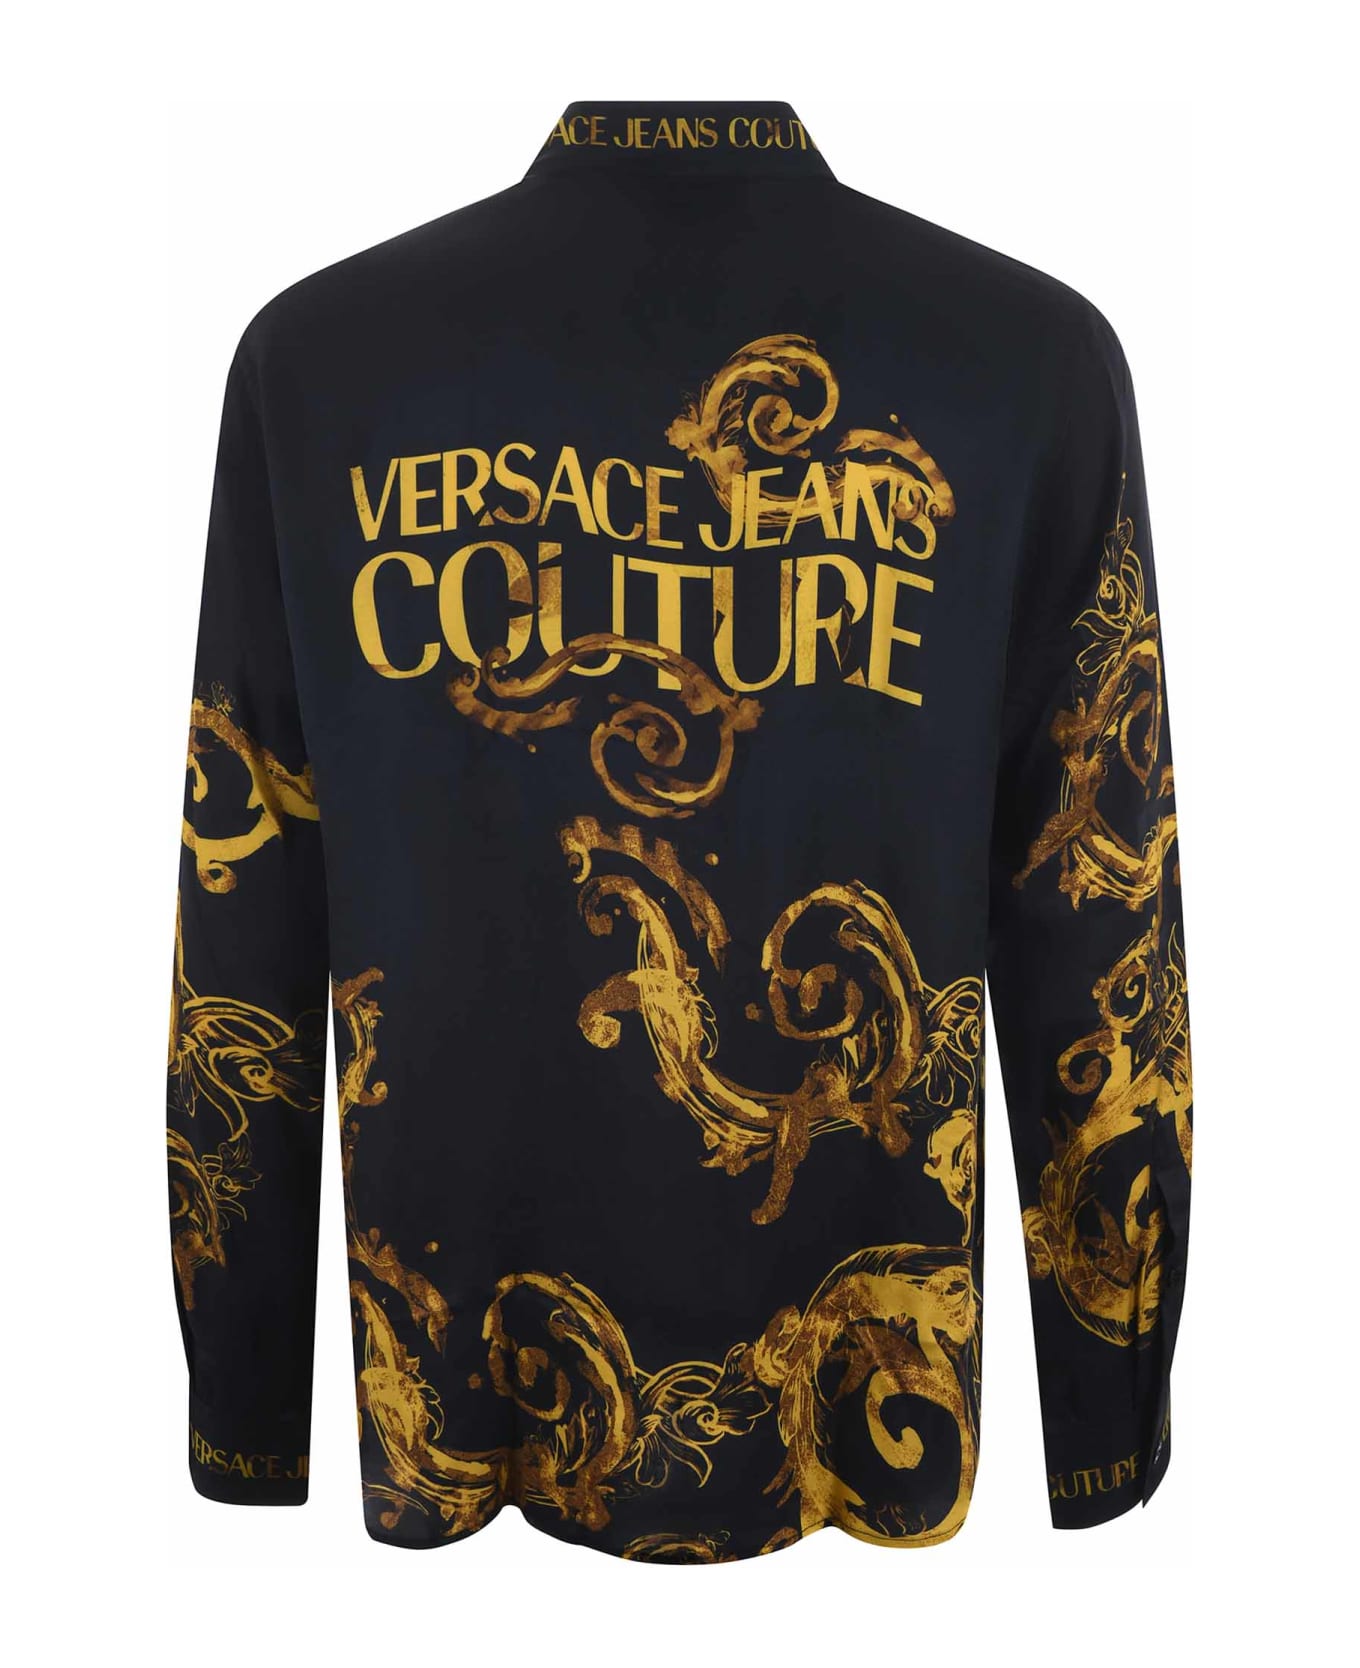 Versace Jeans Couture Baroque Shirt - Nero/oro